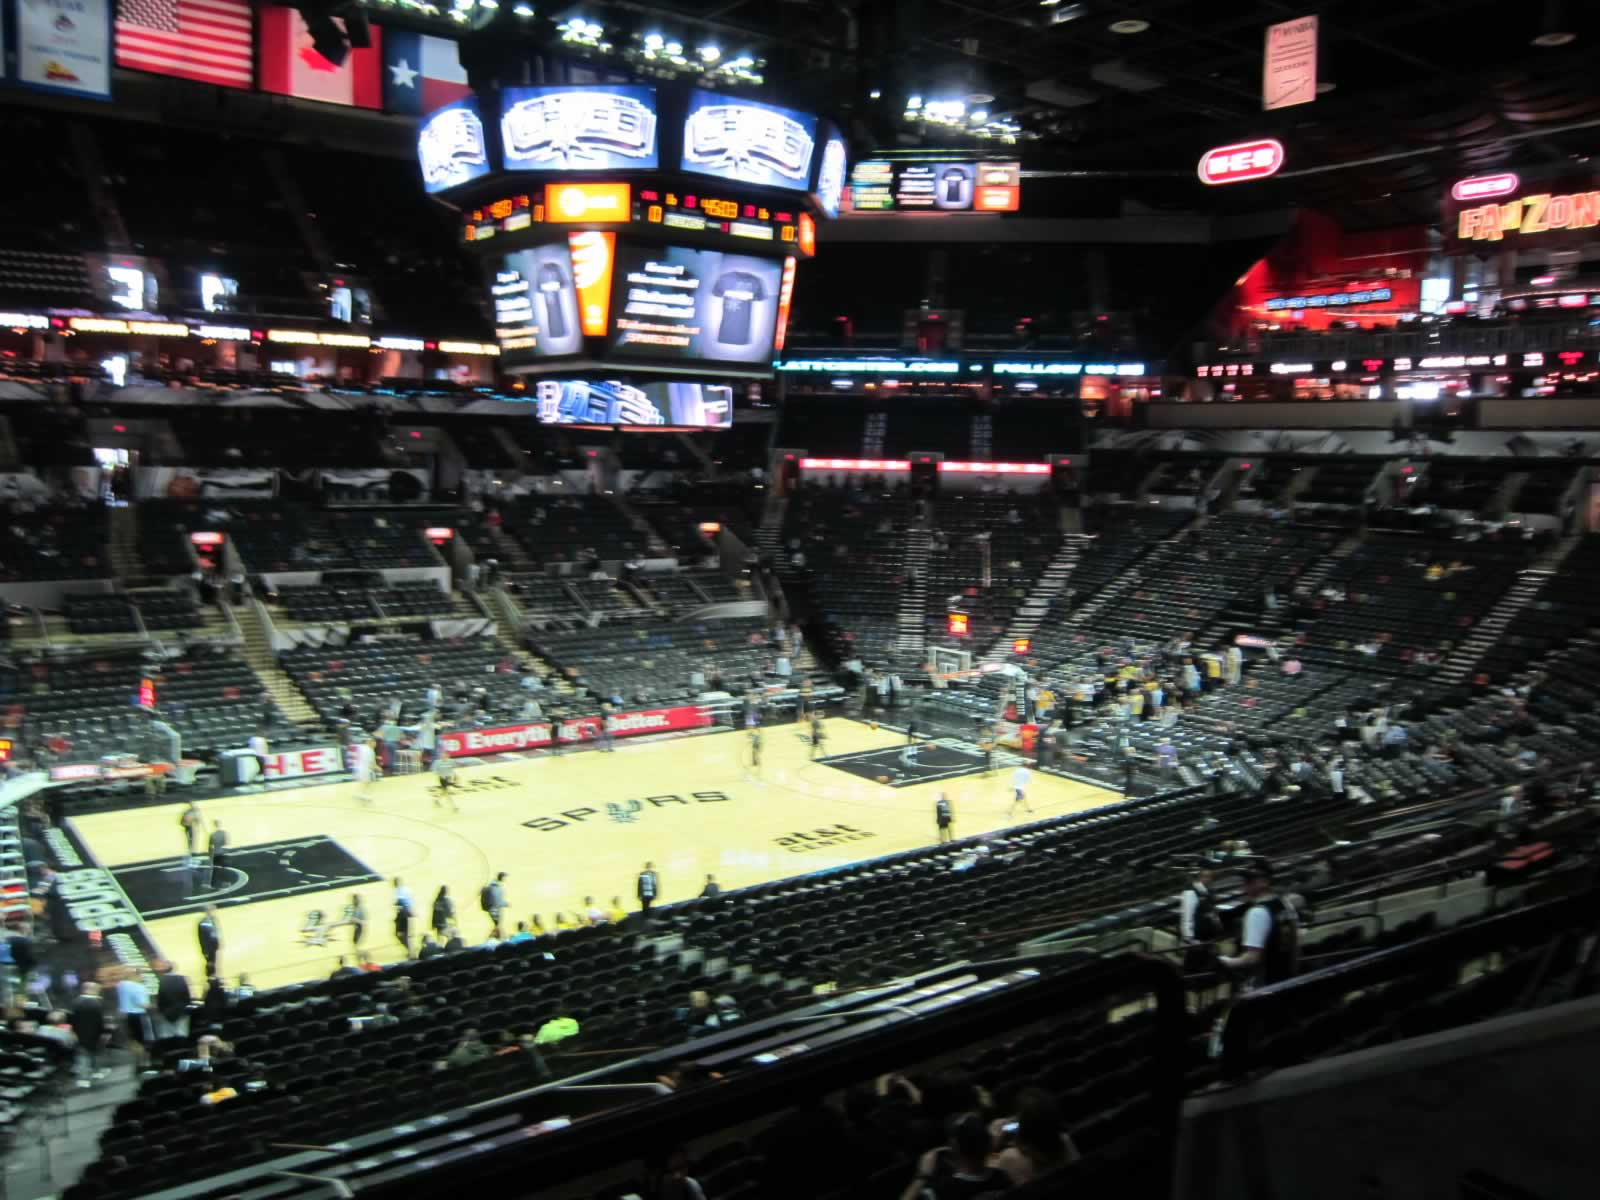 section 124, row 30 seat view  for basketball - at&t center